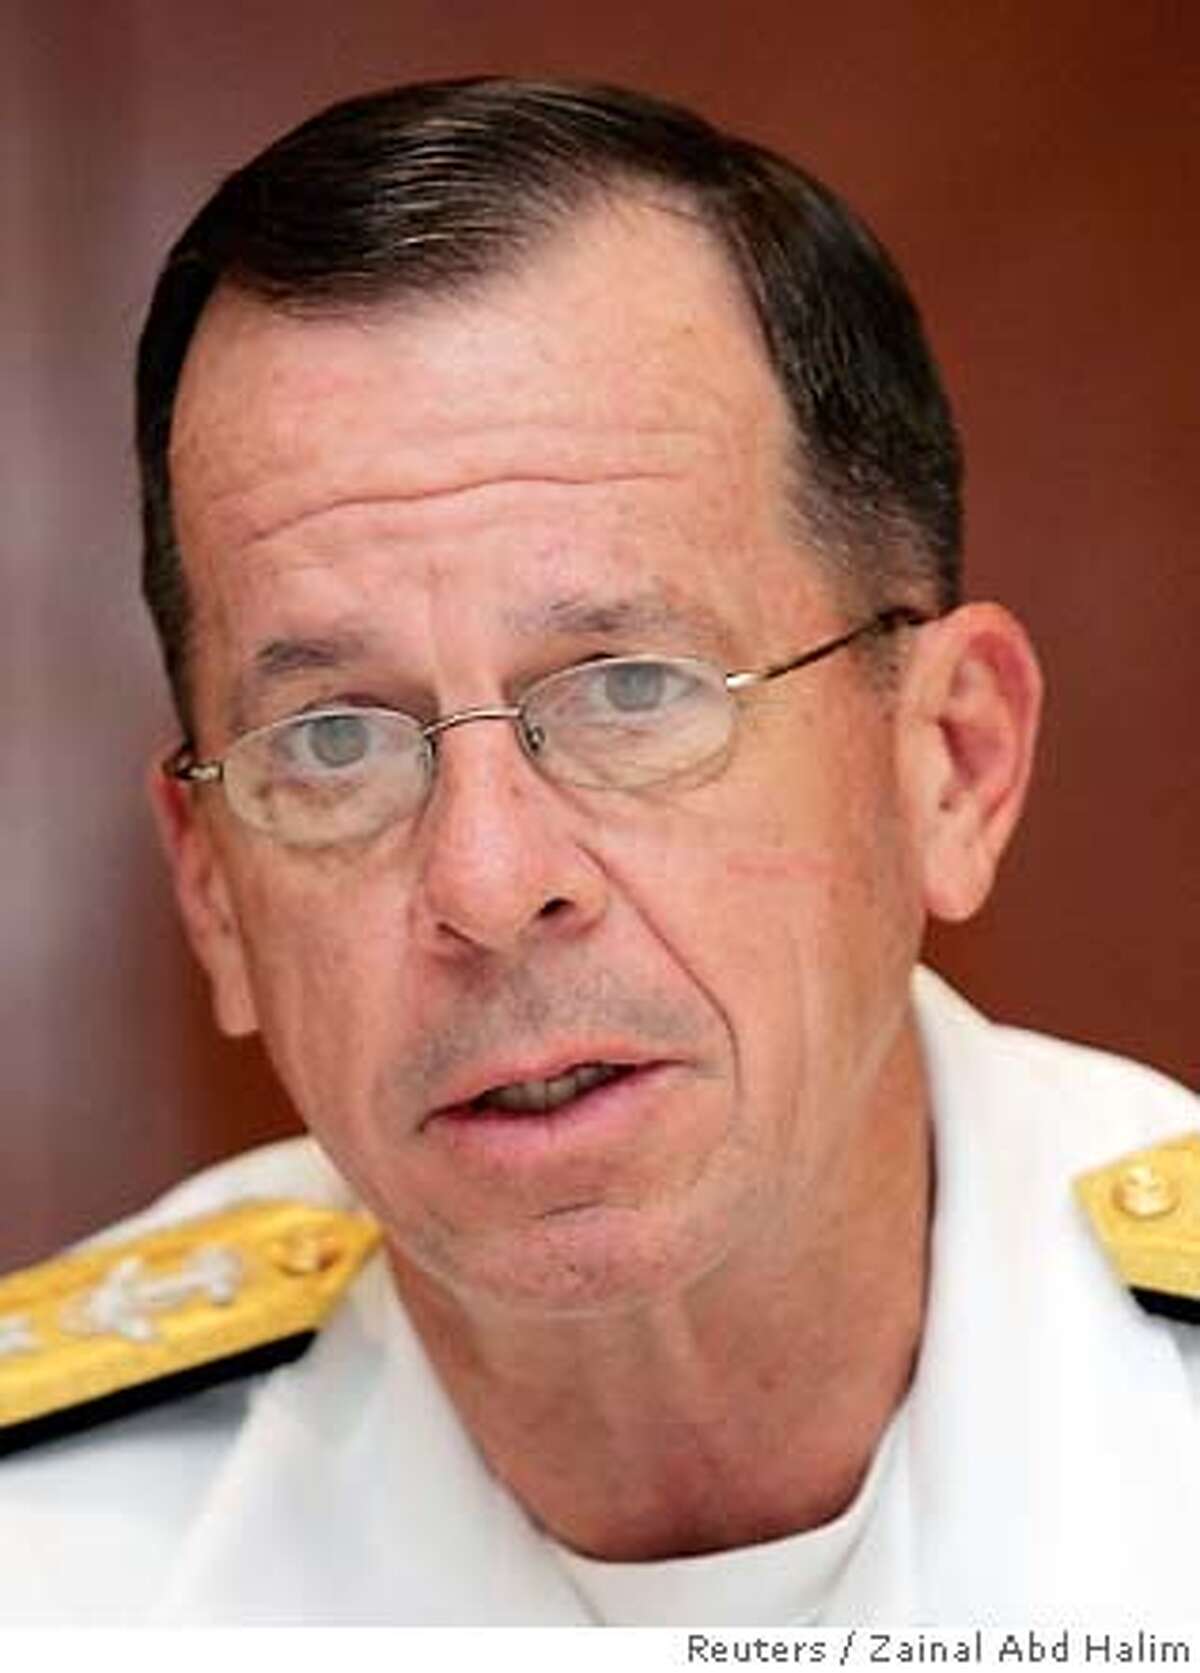 U.S Chief of Naval Operations Admiral Michael G. Mullen speaks during a news conference in Kuala Lumpur in this July 17, 2006 file photo. Mullen will replace General Peter Pace, the current Chairman of the Joint Chiefs of Staff, who will retire at the end of his terma later this year, Defense Secretary Robert Gates said on June 8, 2007. REUTERS/Zainal Abd Halim/Files (MALAYSIA) 0